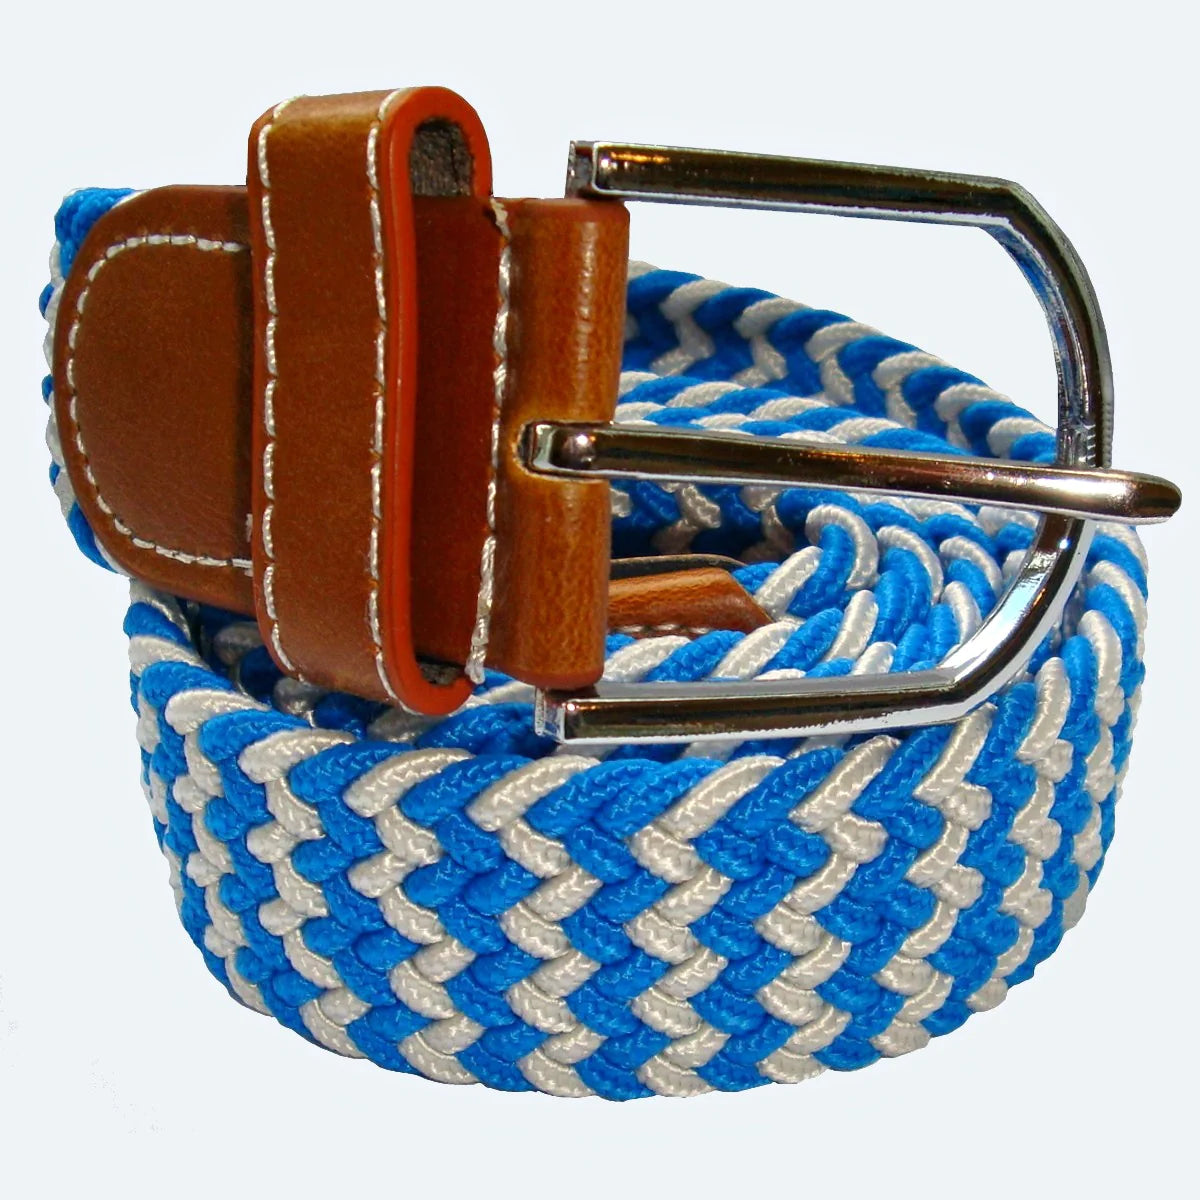 Striped Woven Elasticated Belt - Blue and White